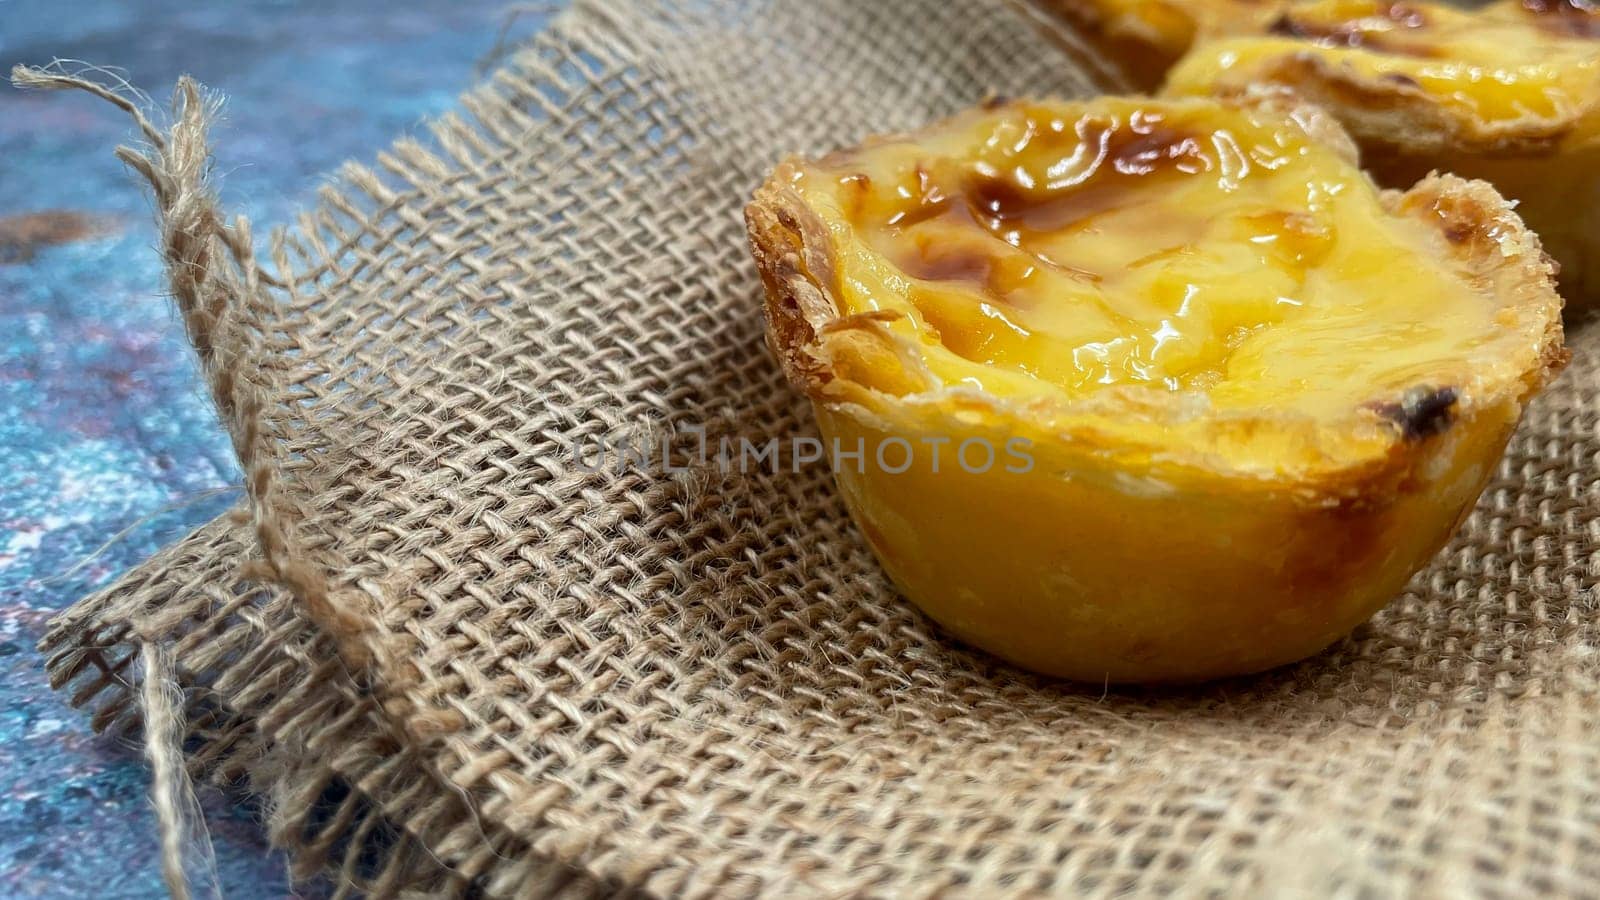 Lots of freshly baked desserts Pastel de nata or Portuguese egg tart. Pastel de Belm is a small pie with a crispy puff pastry crust and a custard cream filling. A small dessert, a cupcake. by Roshchyn